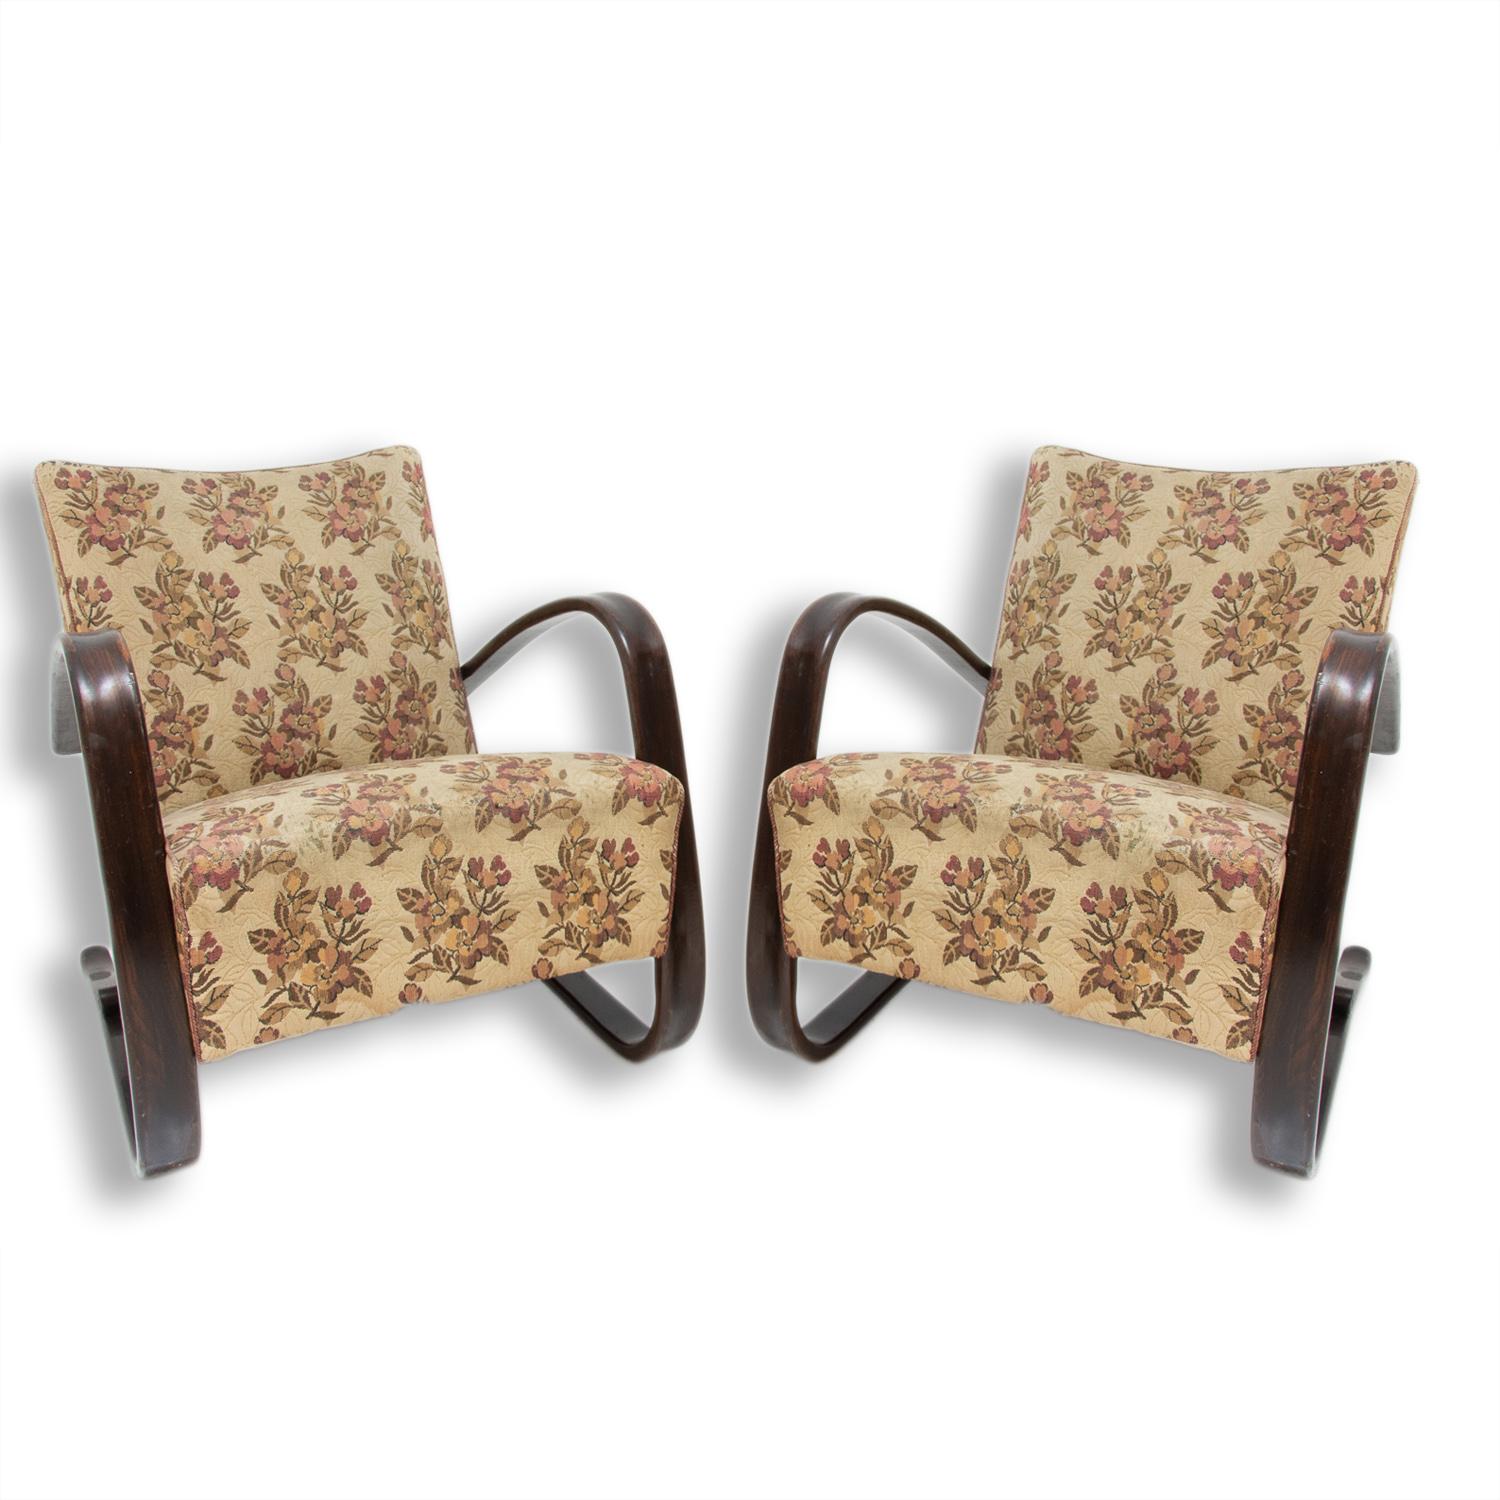 Mid-20th Century Pair of H-269 Armchairs Designed by Jindrich Halabala, 1930s